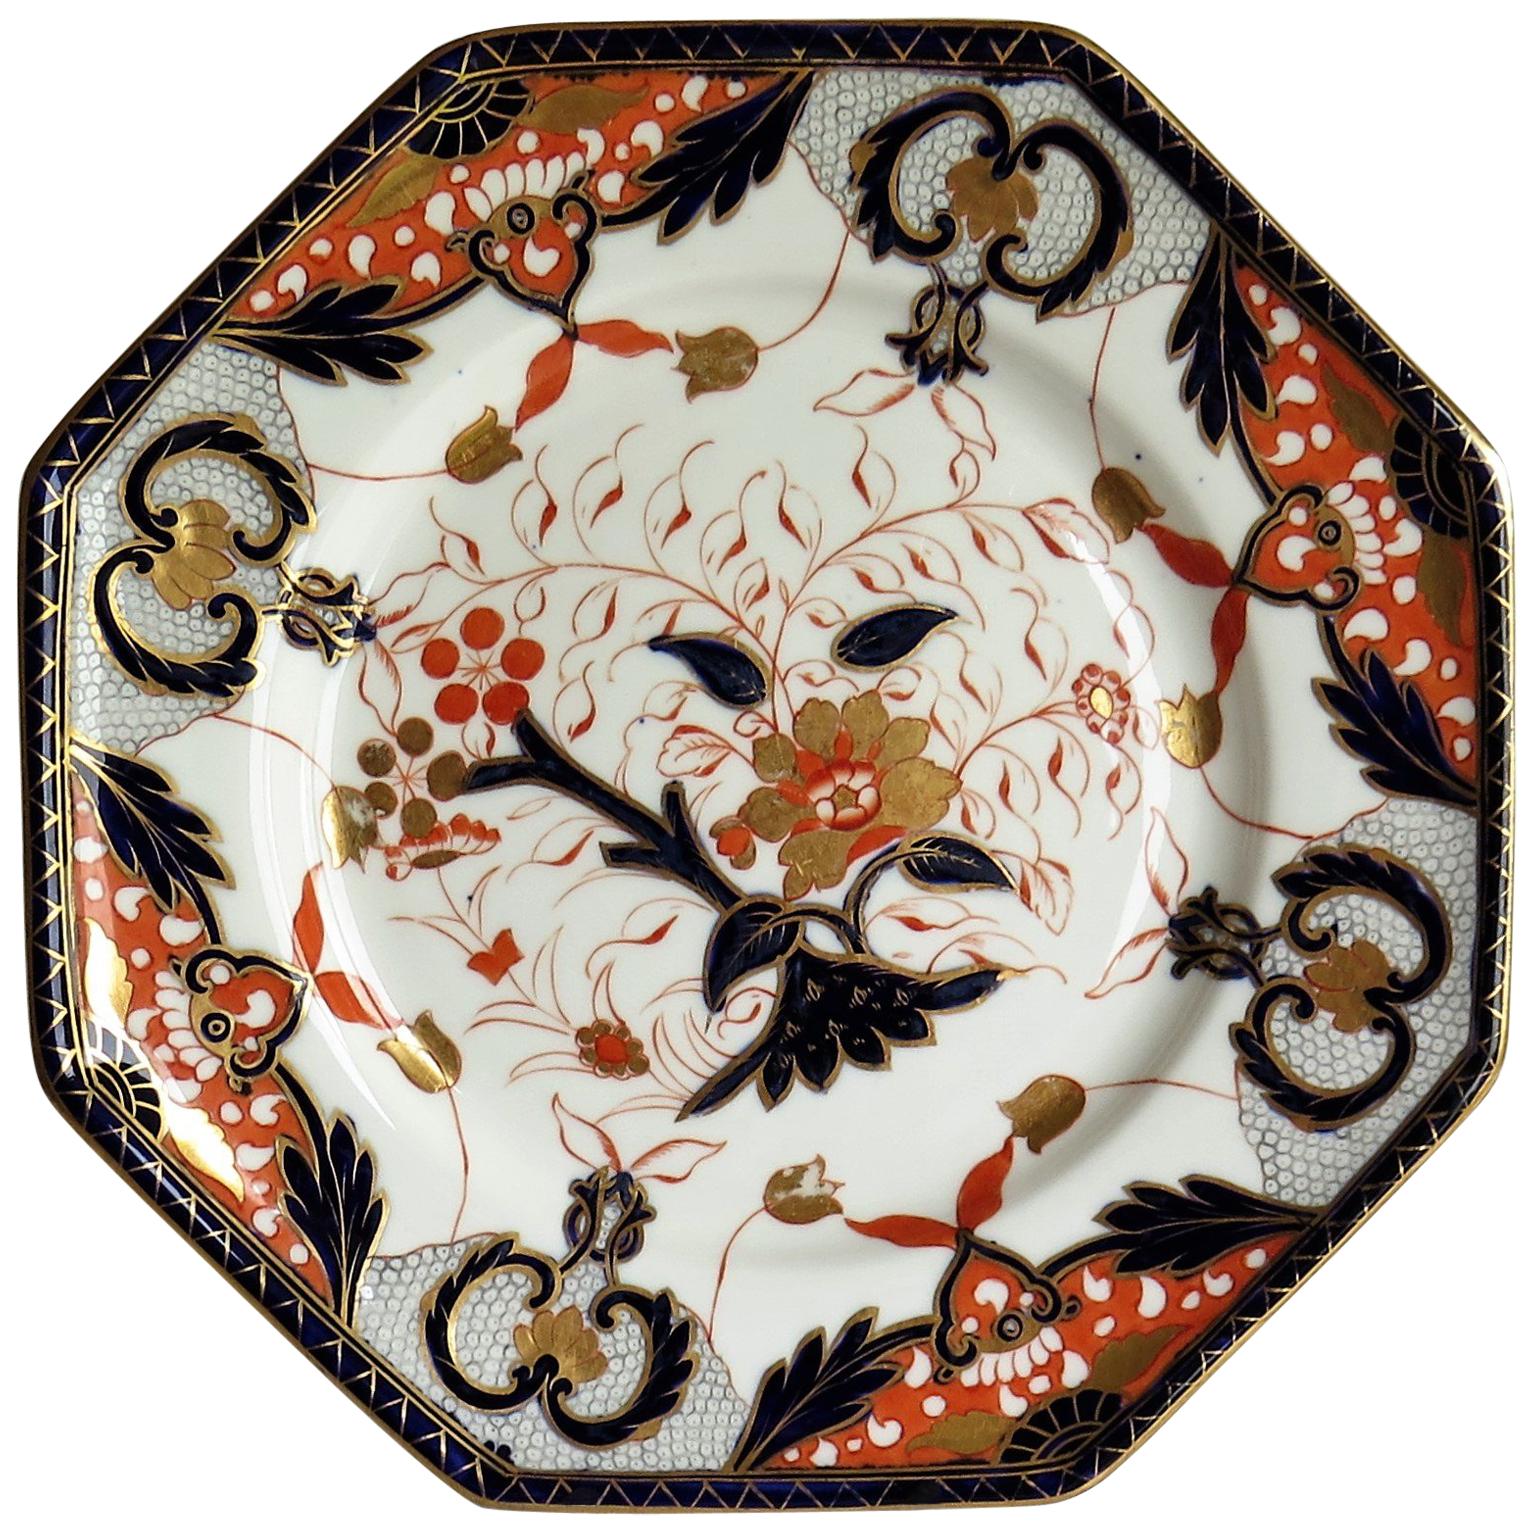 Davenport Porcelain Plate Hand Painted and Gilded Pattern, England Circa 1875